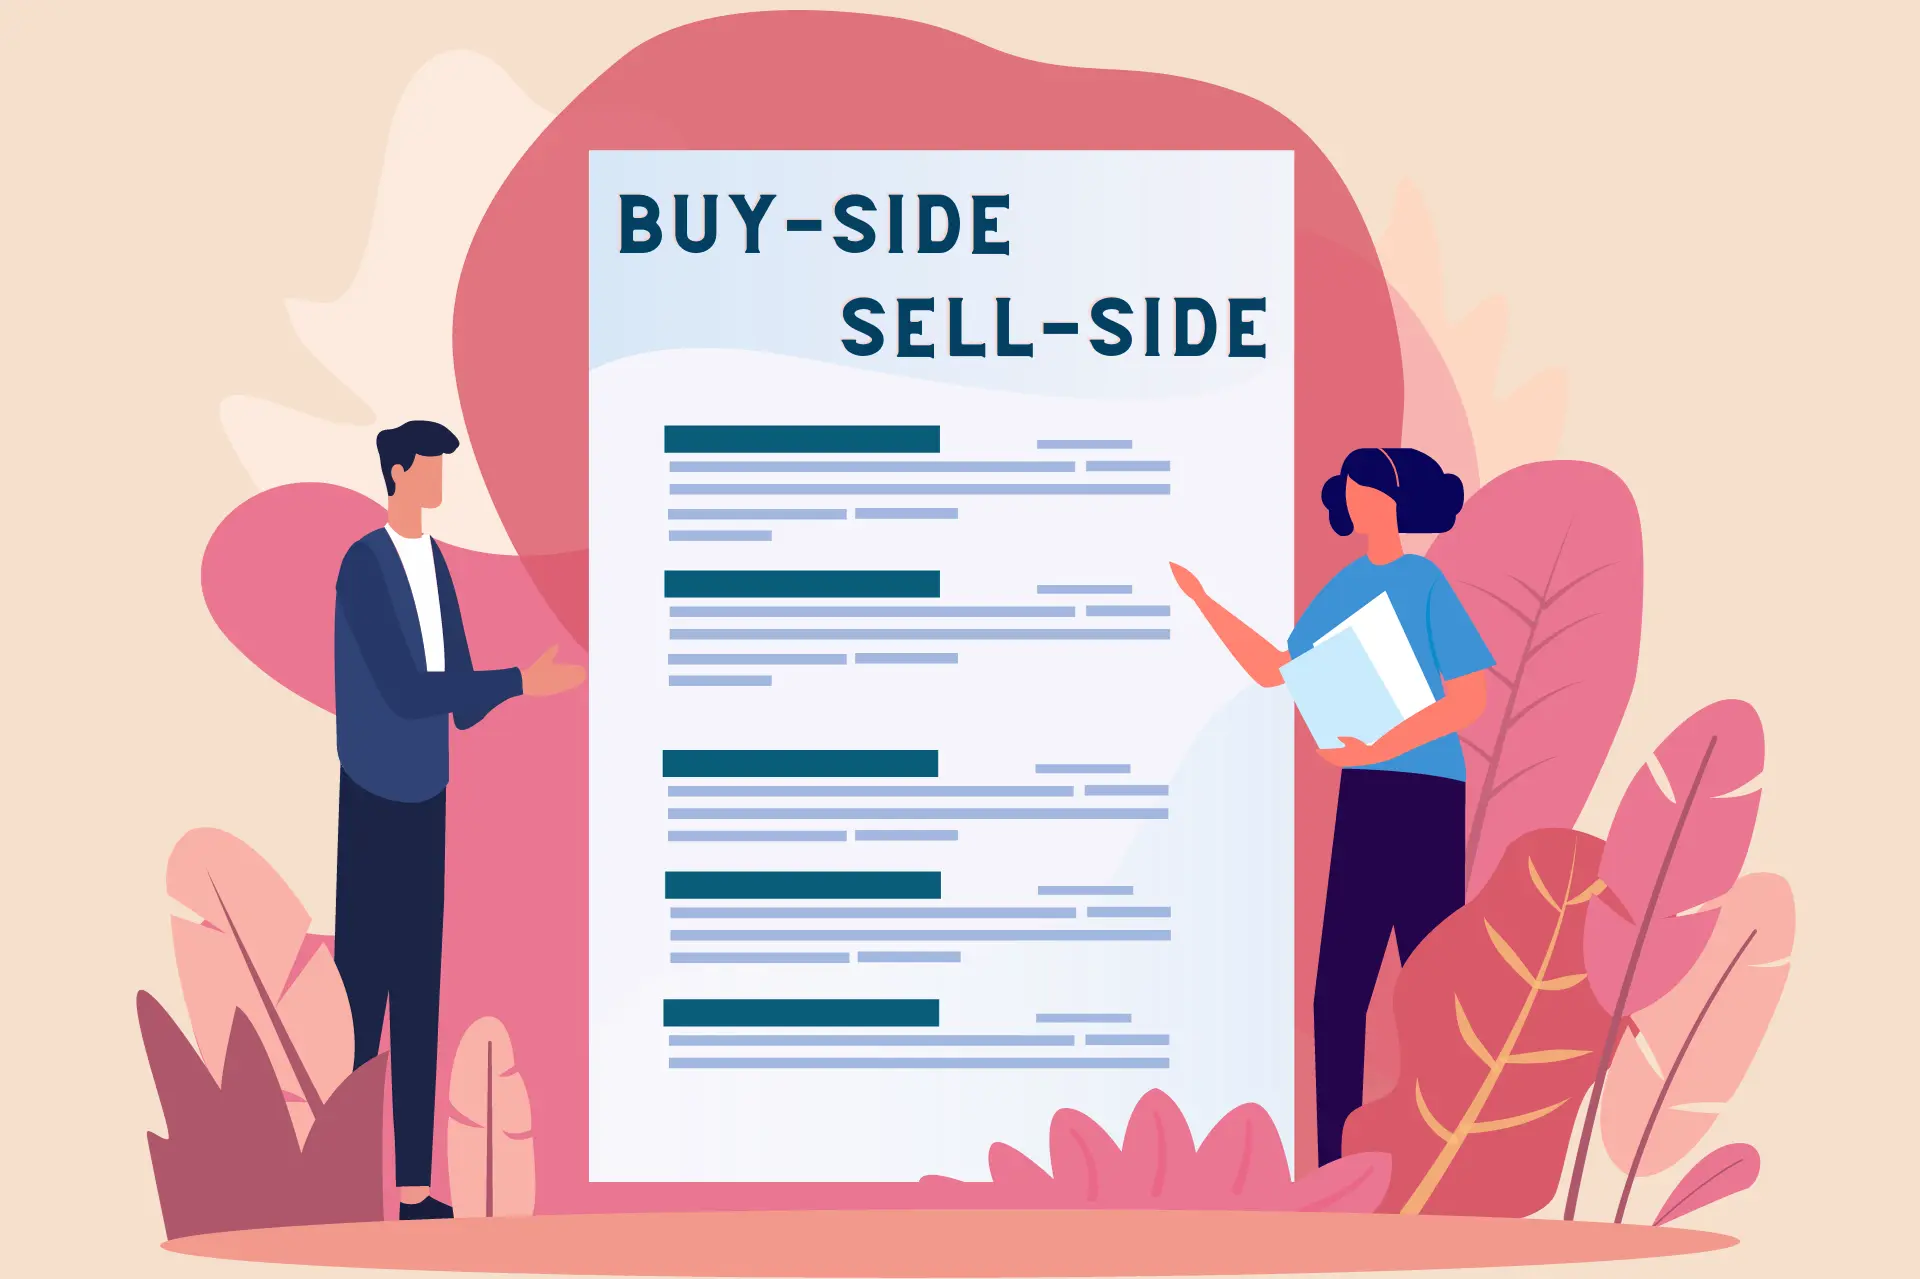 How To Manage Buy-Side vs. Sell-Side Contracts